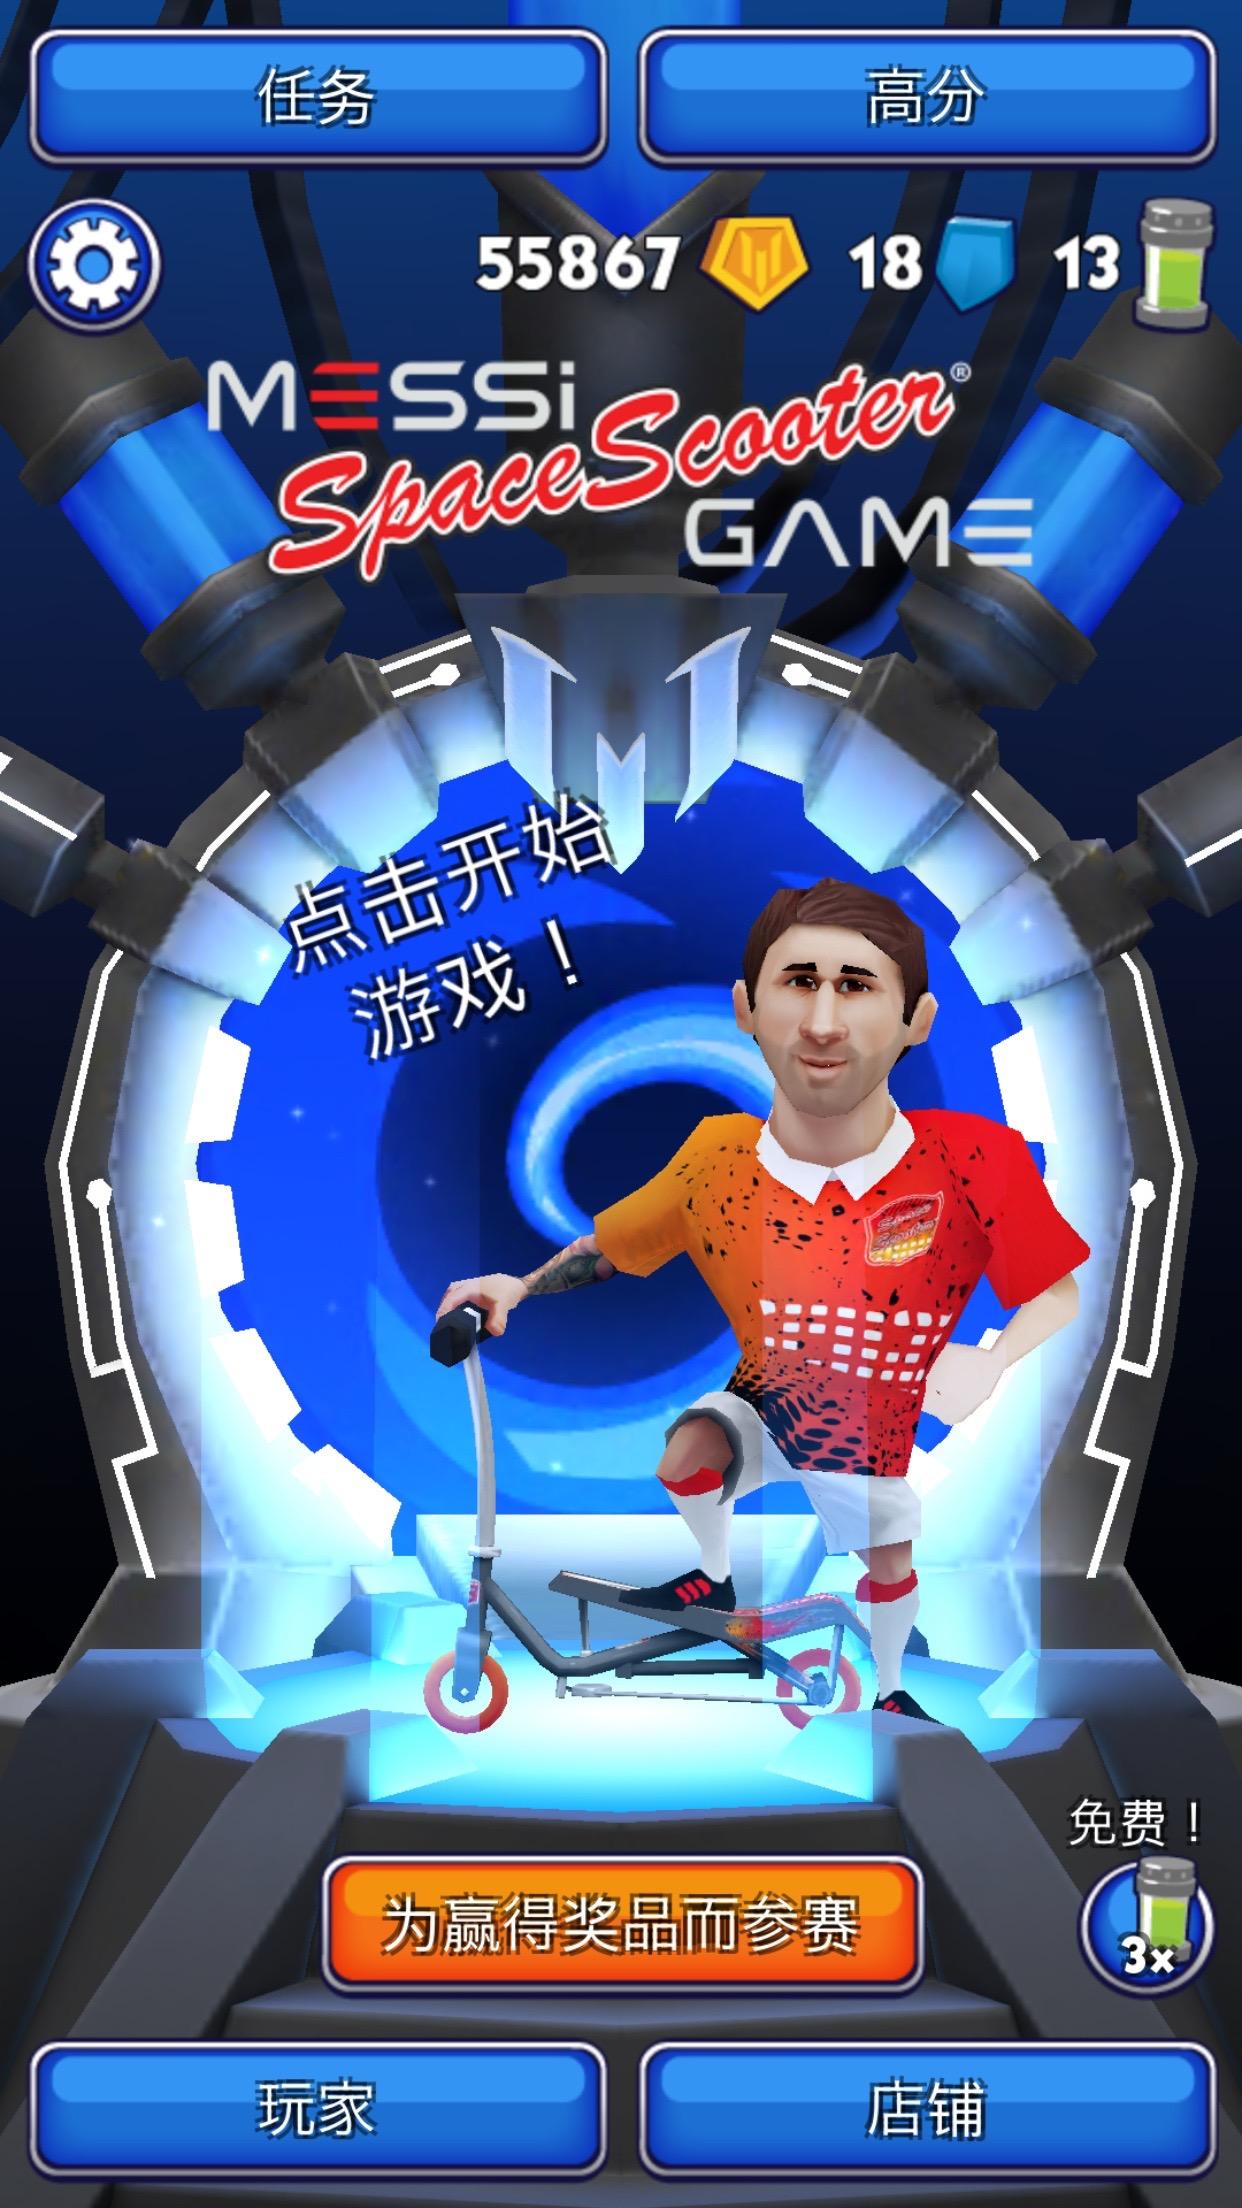 Android application Messi Space Scooter Game screenshort